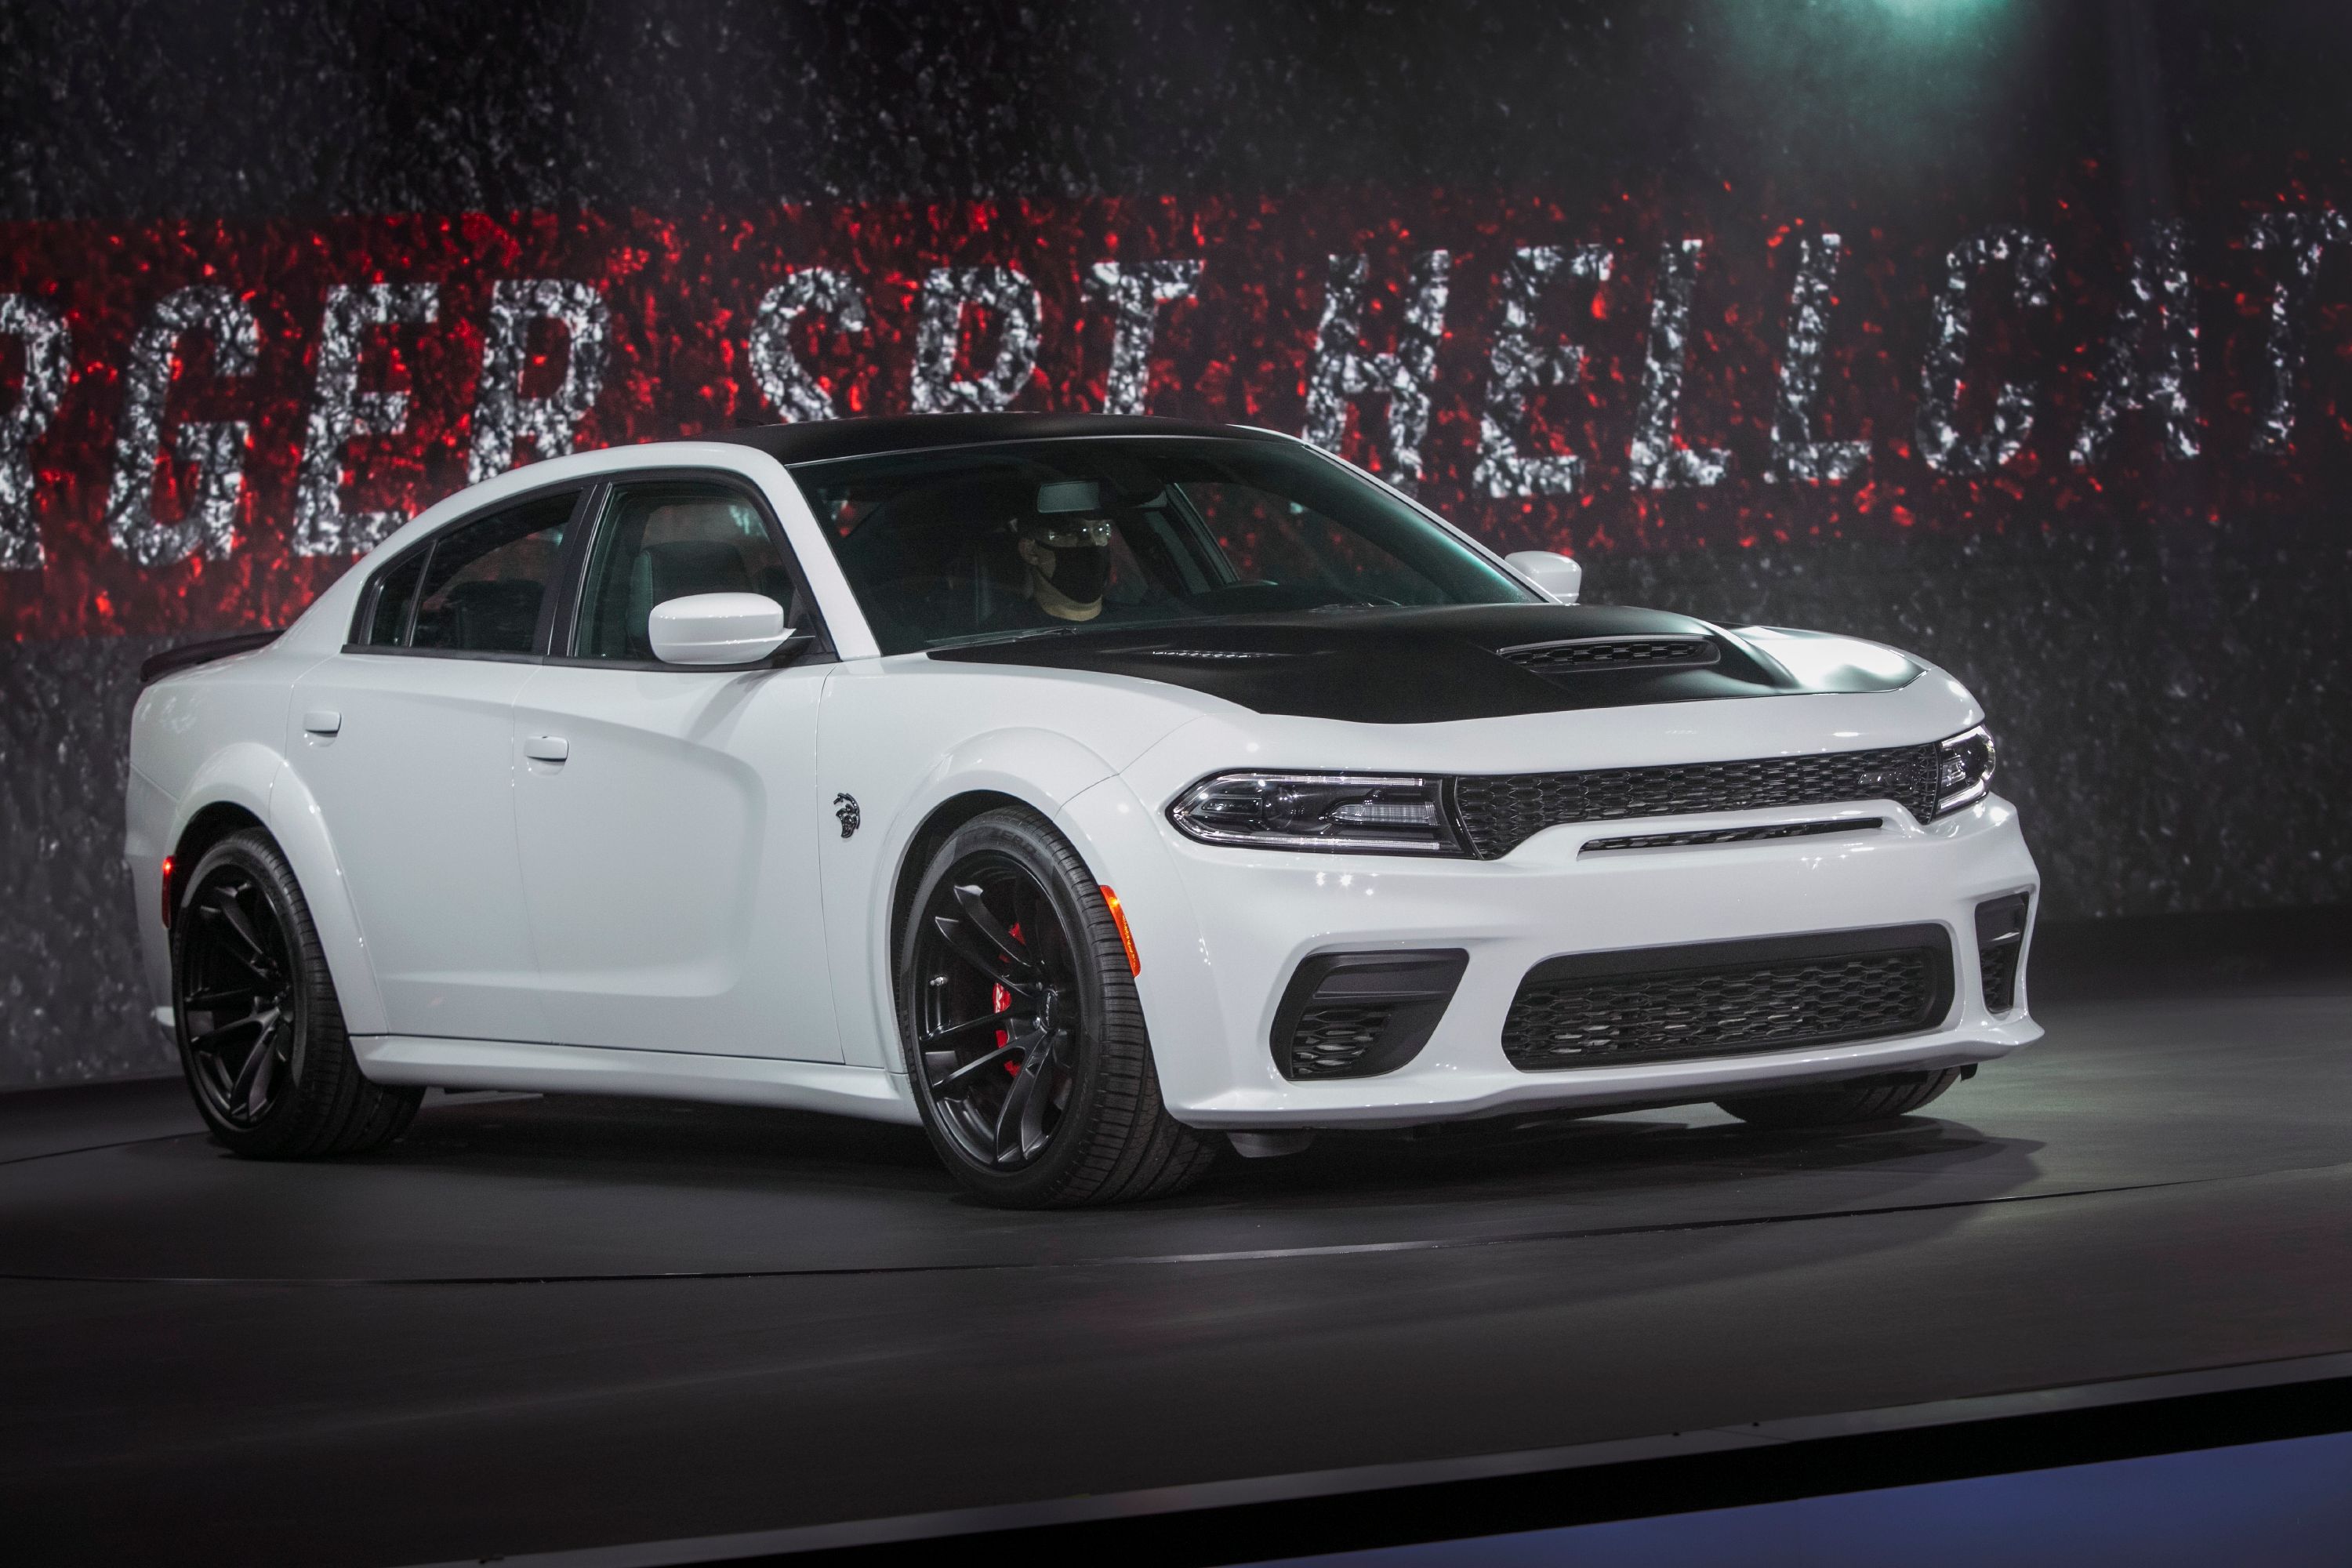 2020 The 2021 Dodge Charger SRT Hellcat Redeye Is Fastest and Most Powerful Sedan In the World